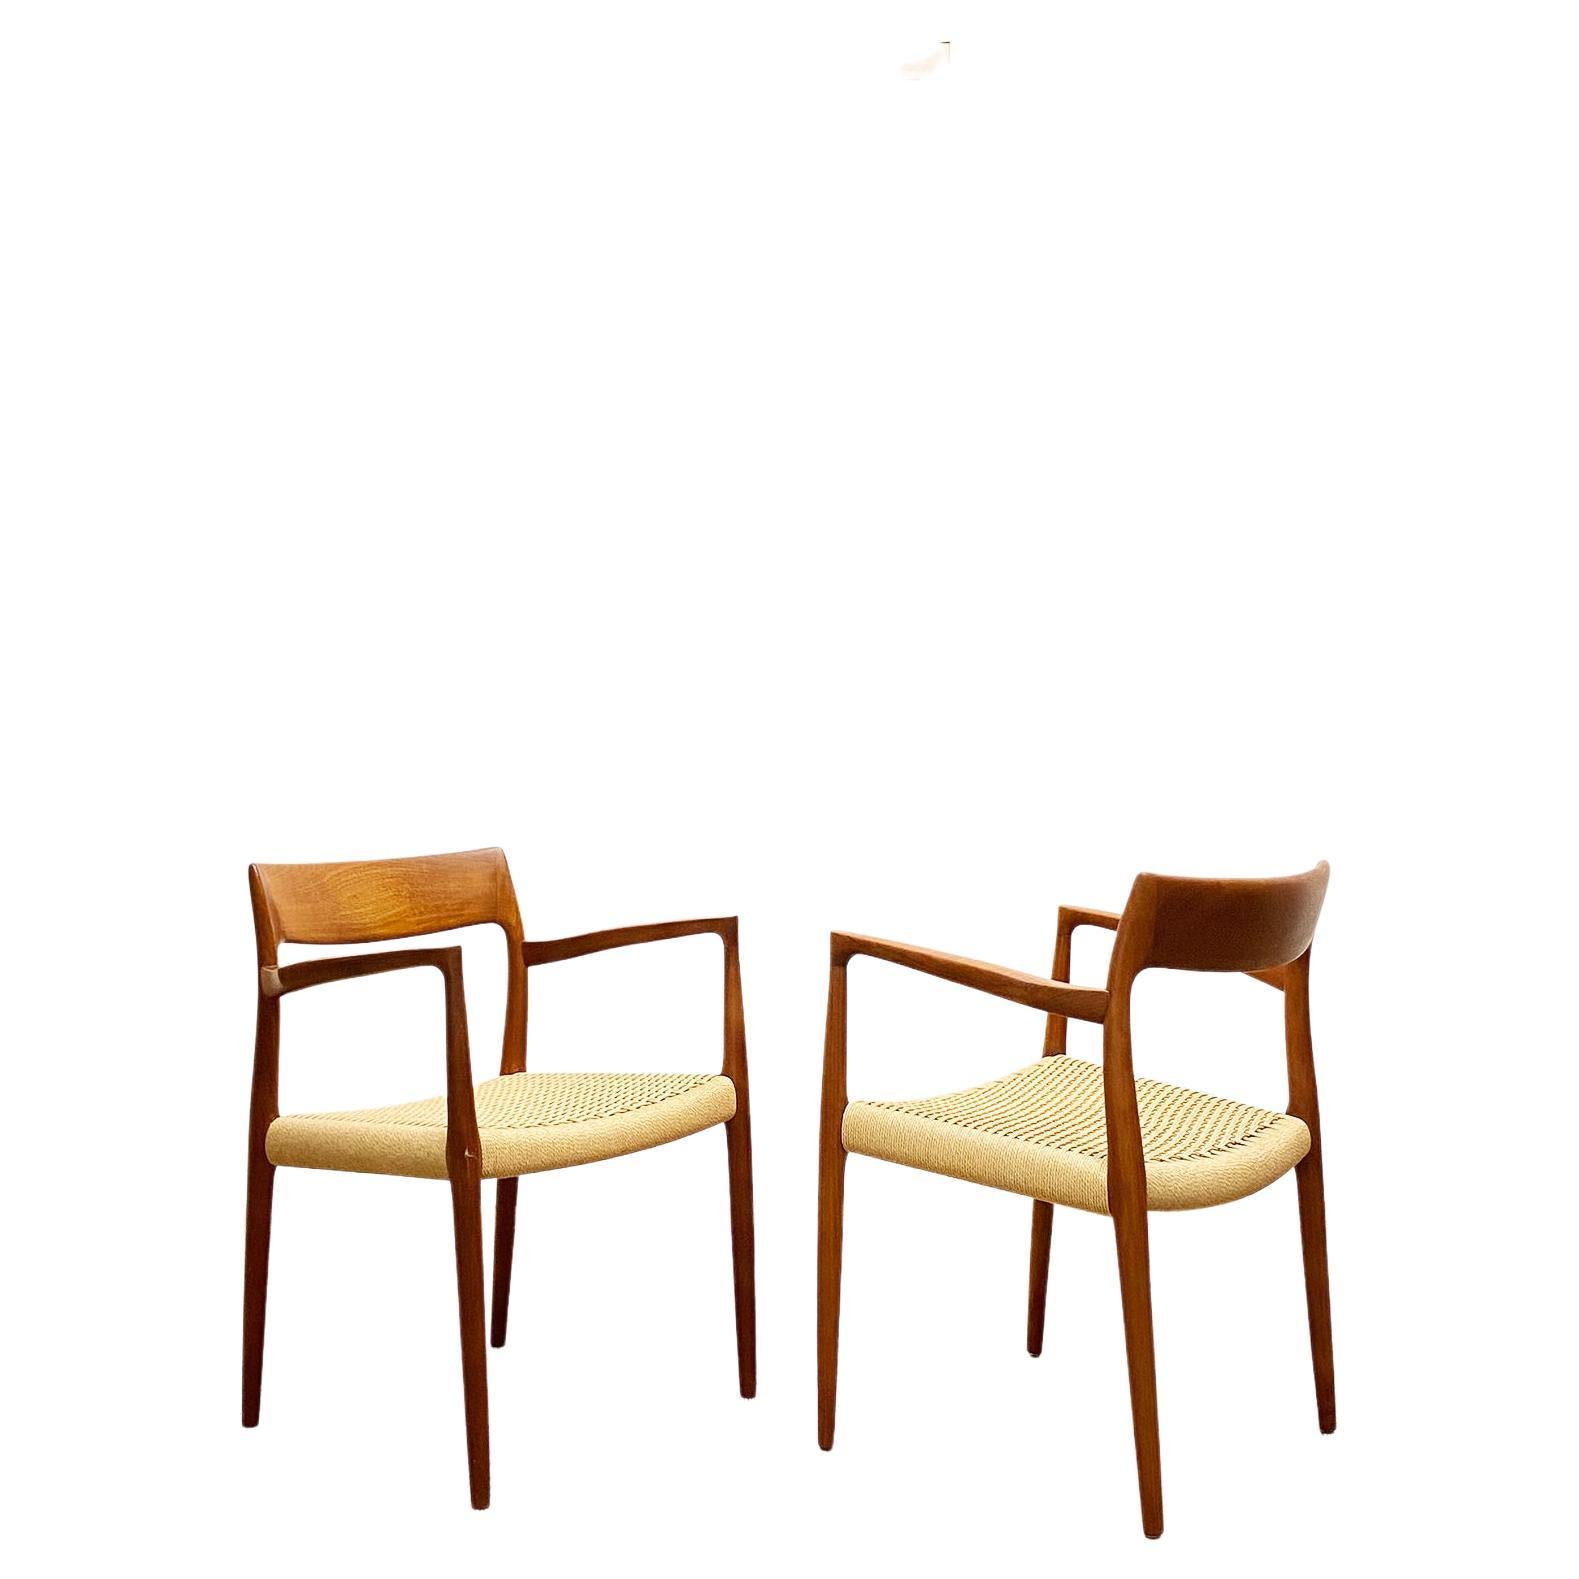 Mid-Century Teak Dining Chairs #57 by Niels O. Møller for J. L. Moller, Set of 2